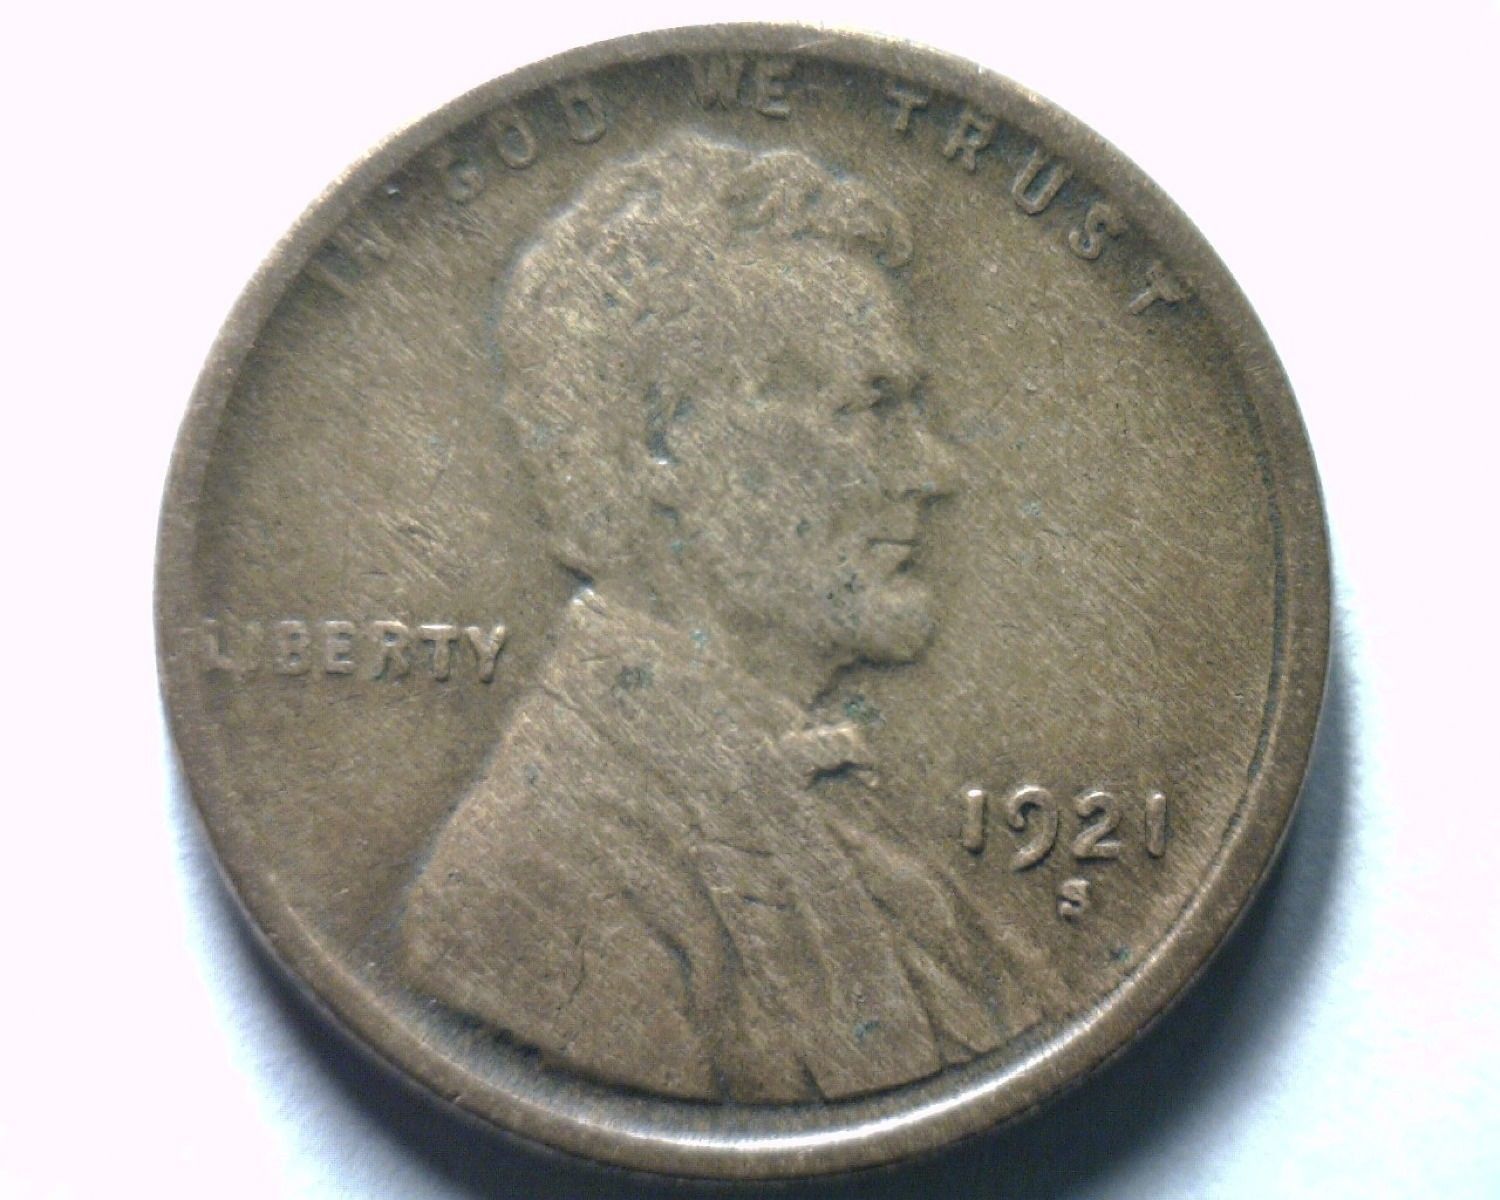 1921-S LINCOLN CENT PENNY EXTRA FINE XF EXTREMELY FINE EF NICE ORIGINAL COIN - $39.00